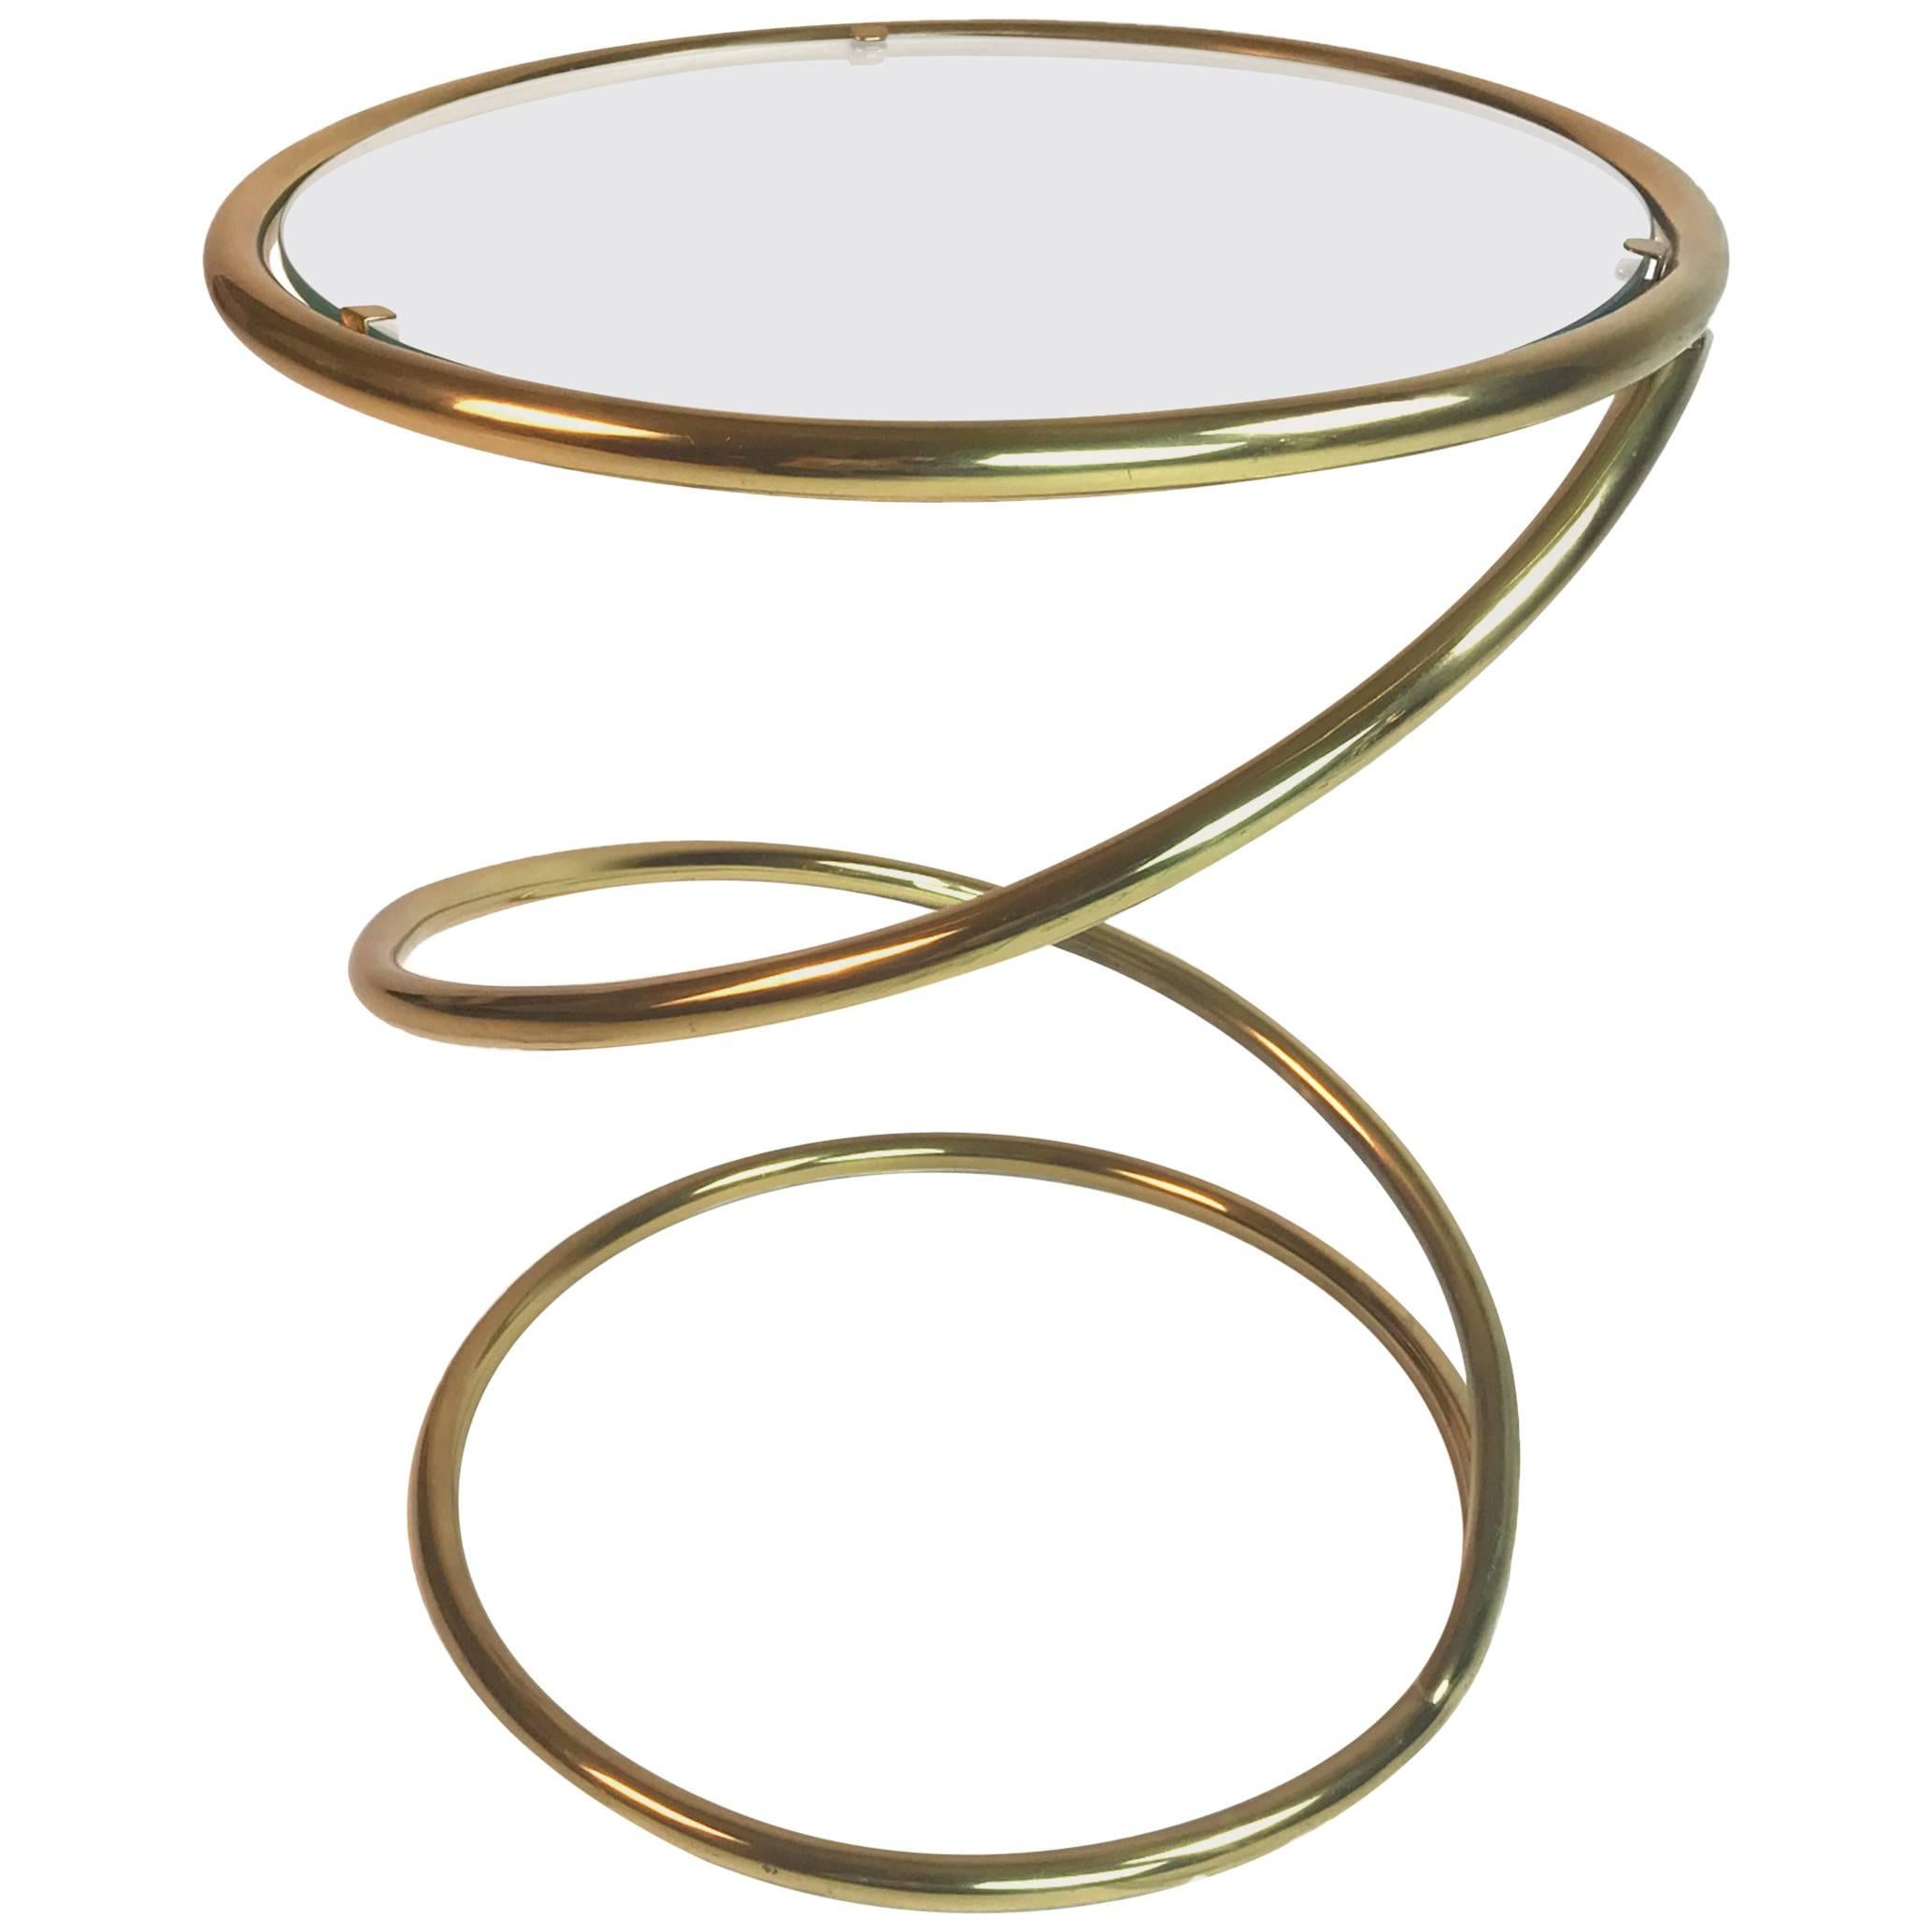 Pace Collection Brass and Glass Spring or Spiral Coffee or End Table